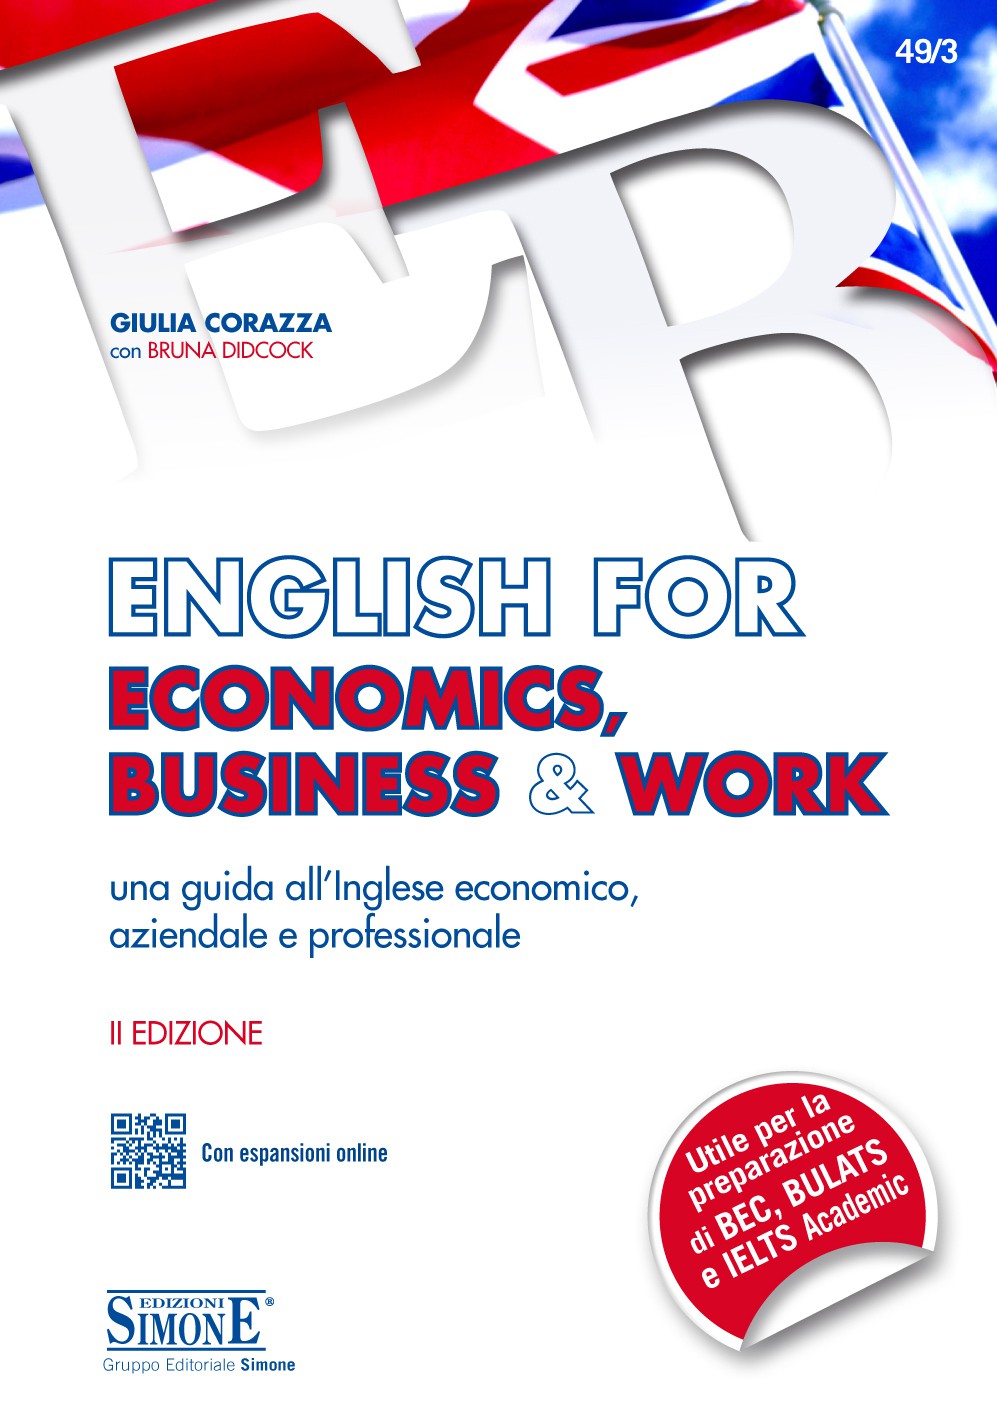 English for Economics, Business & Work - Librerie.coop